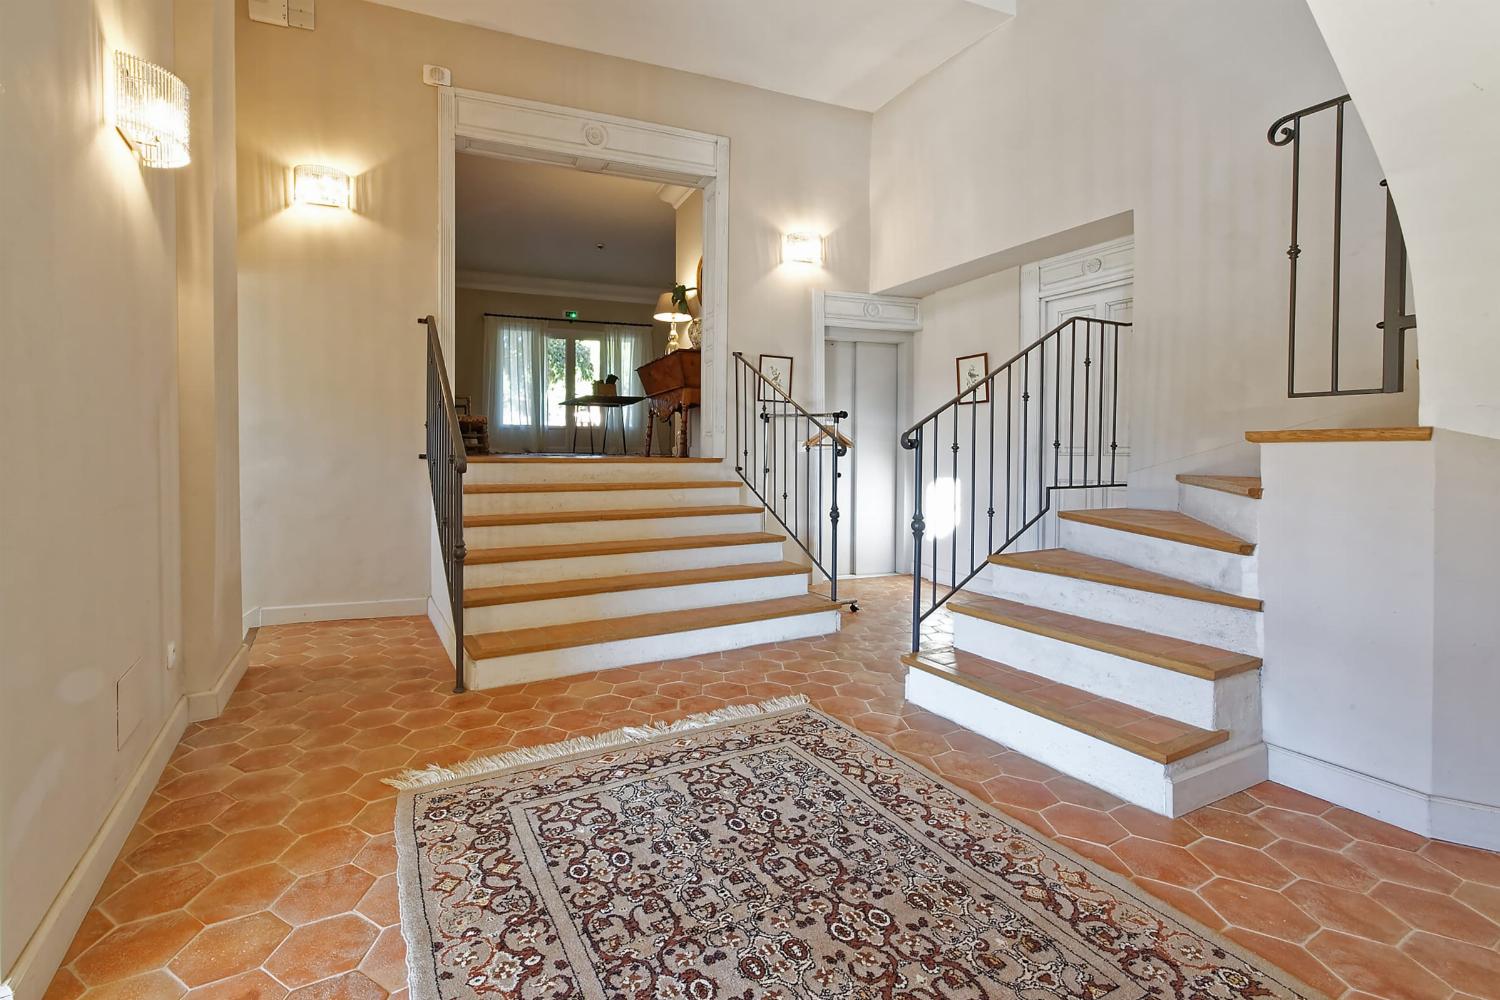 Hallway | Vacation accommodation in Provence